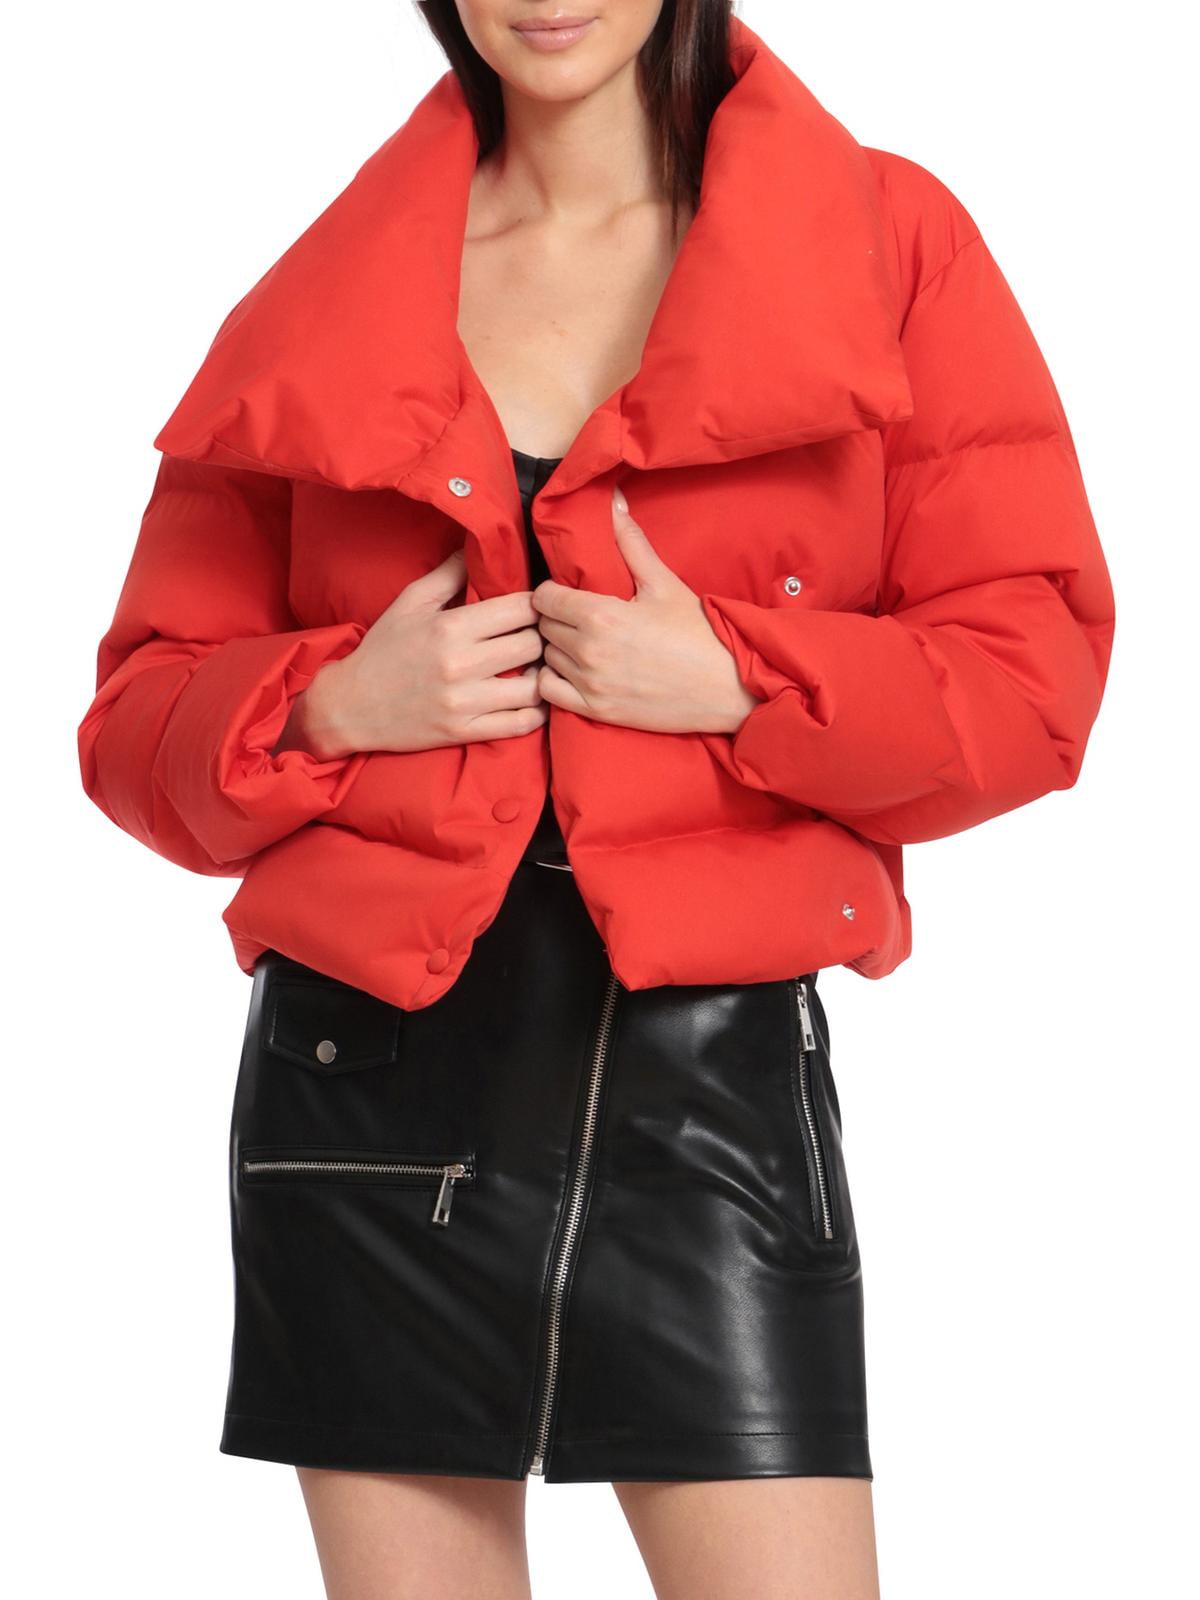 Outfit - Red puffer jacket and patch jeans - Les Berlinettes